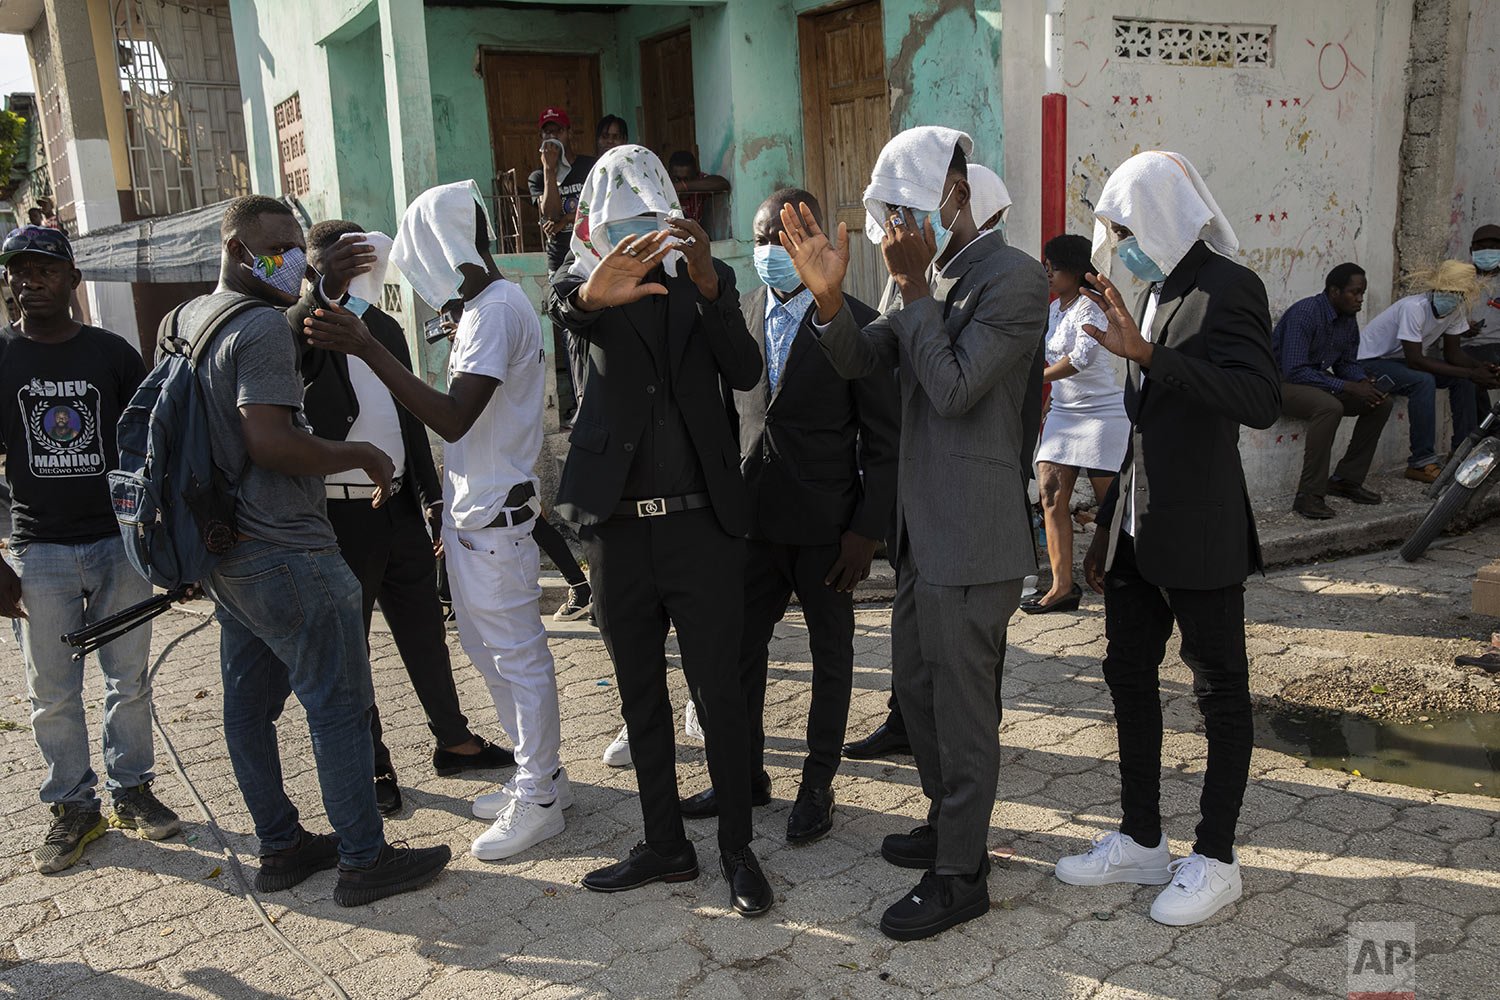  Gang members use hand towels to conceal their identity as they arrive to attend the funeral of fellow gang member Tonino Manino, in Port-au-Prince, Sept. 30, 2021. (AP Photo/Rodrigo Abd) 